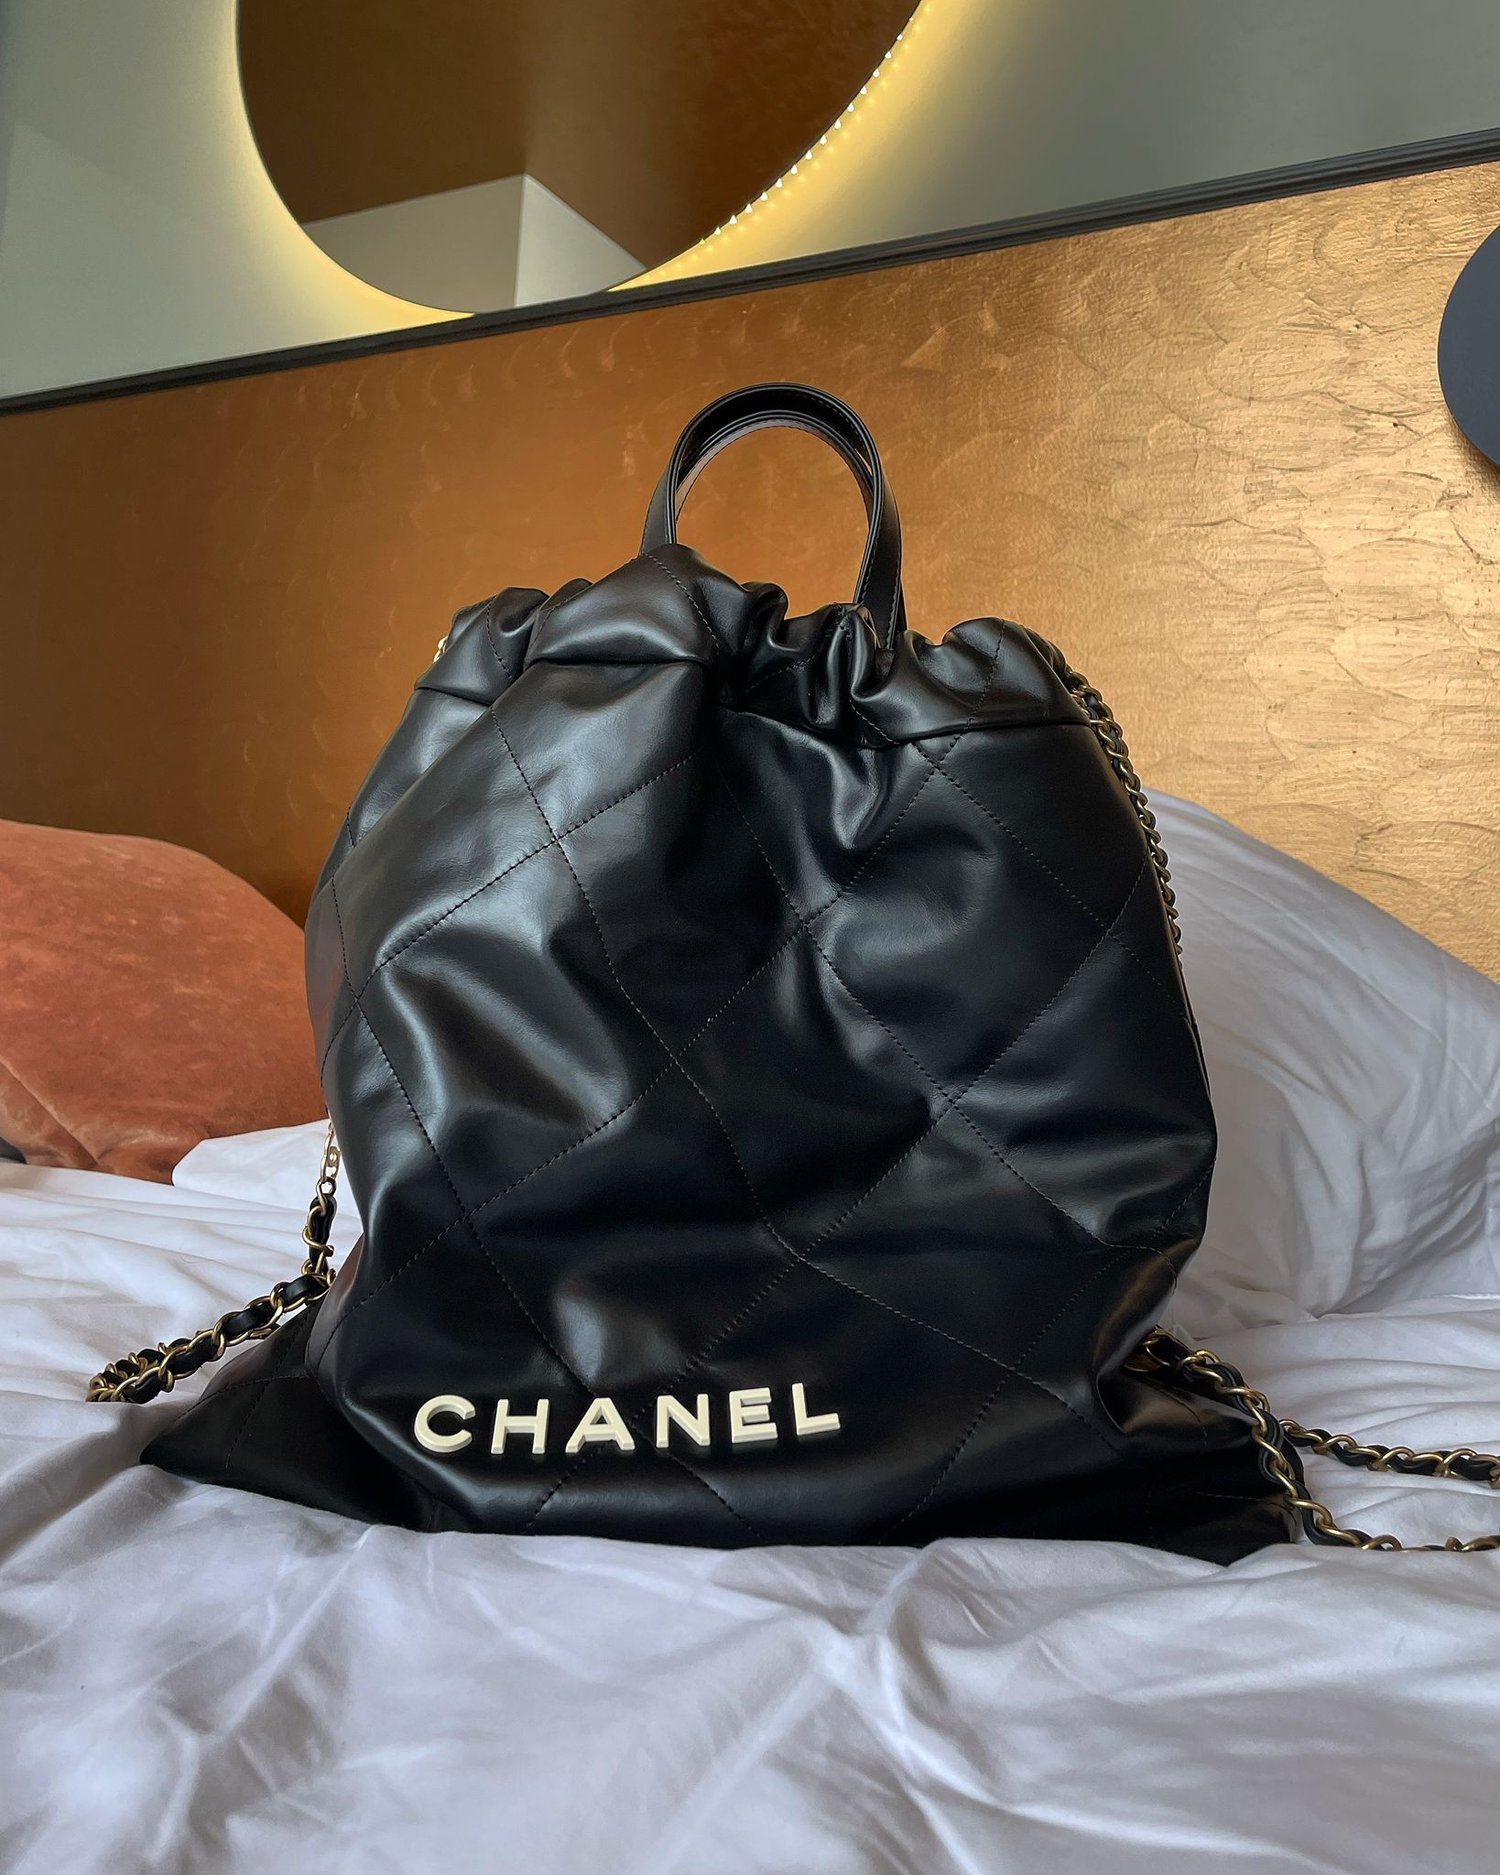 Chanel: Hands On With the New 22 Bag — Parisian Sweet